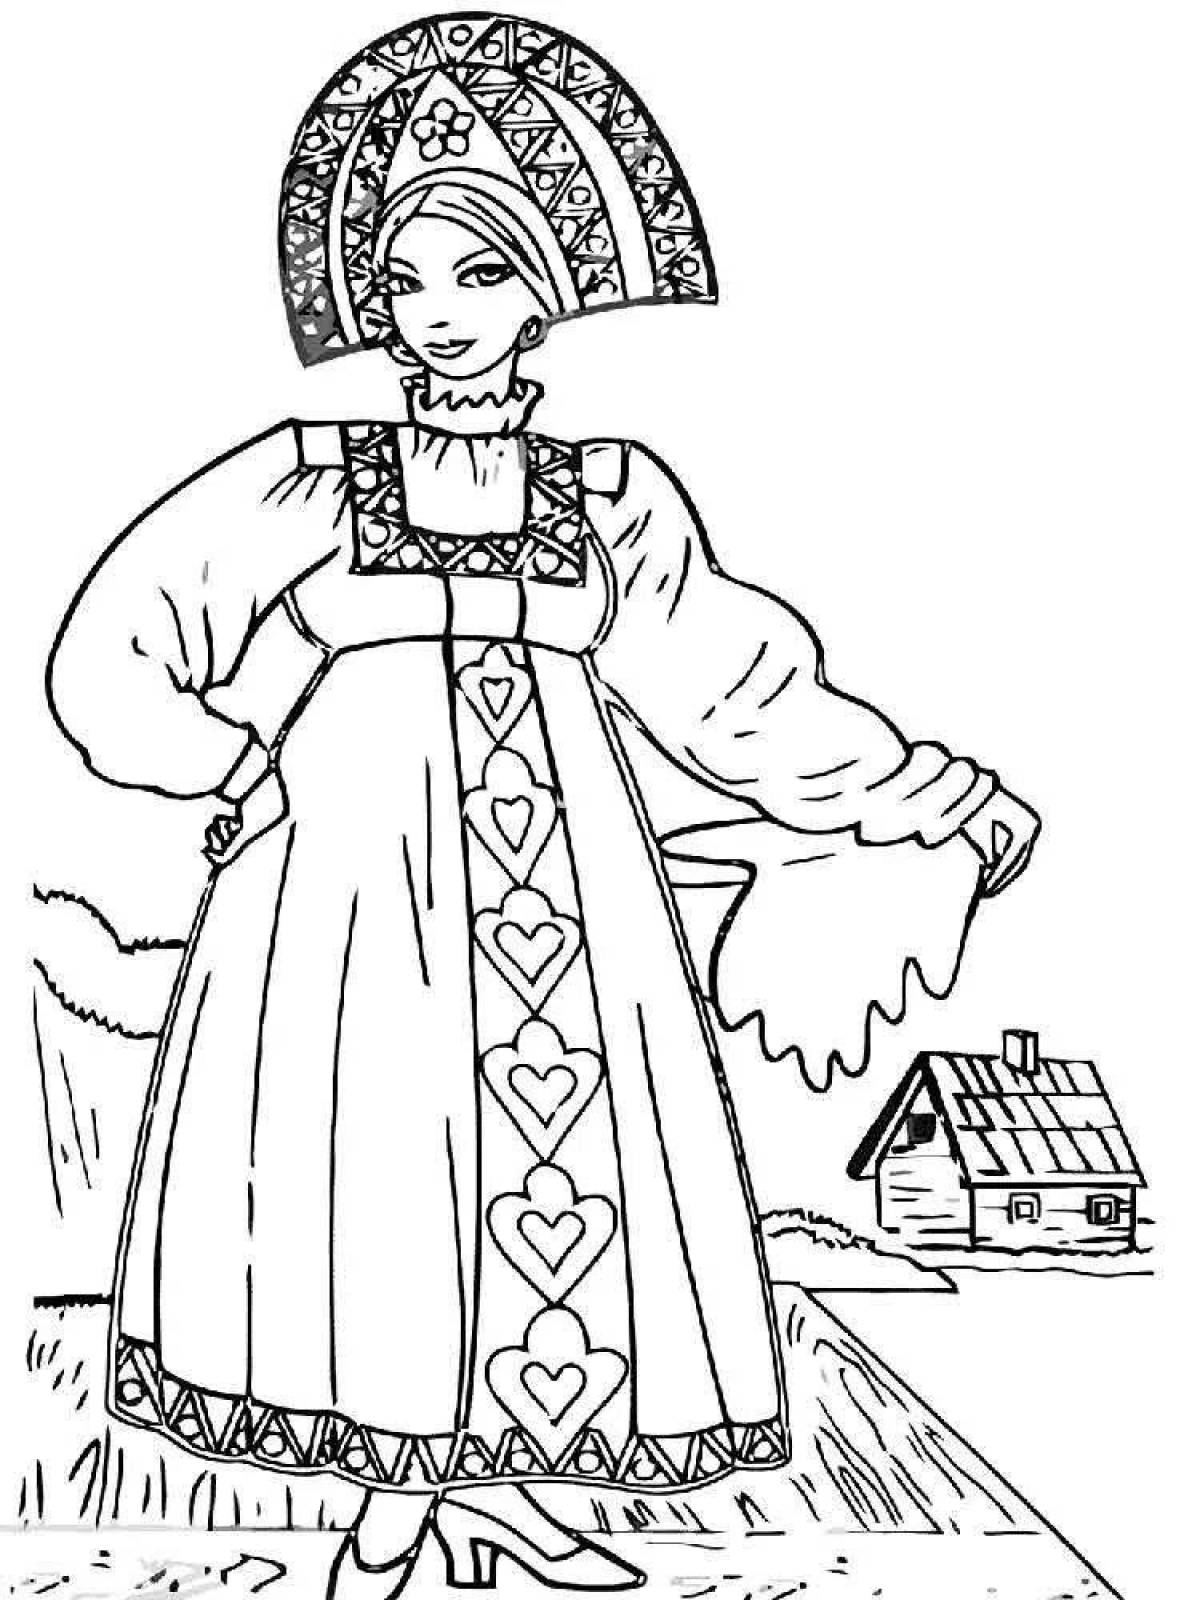 Colourful coloring of a girl in a Russian folk costume